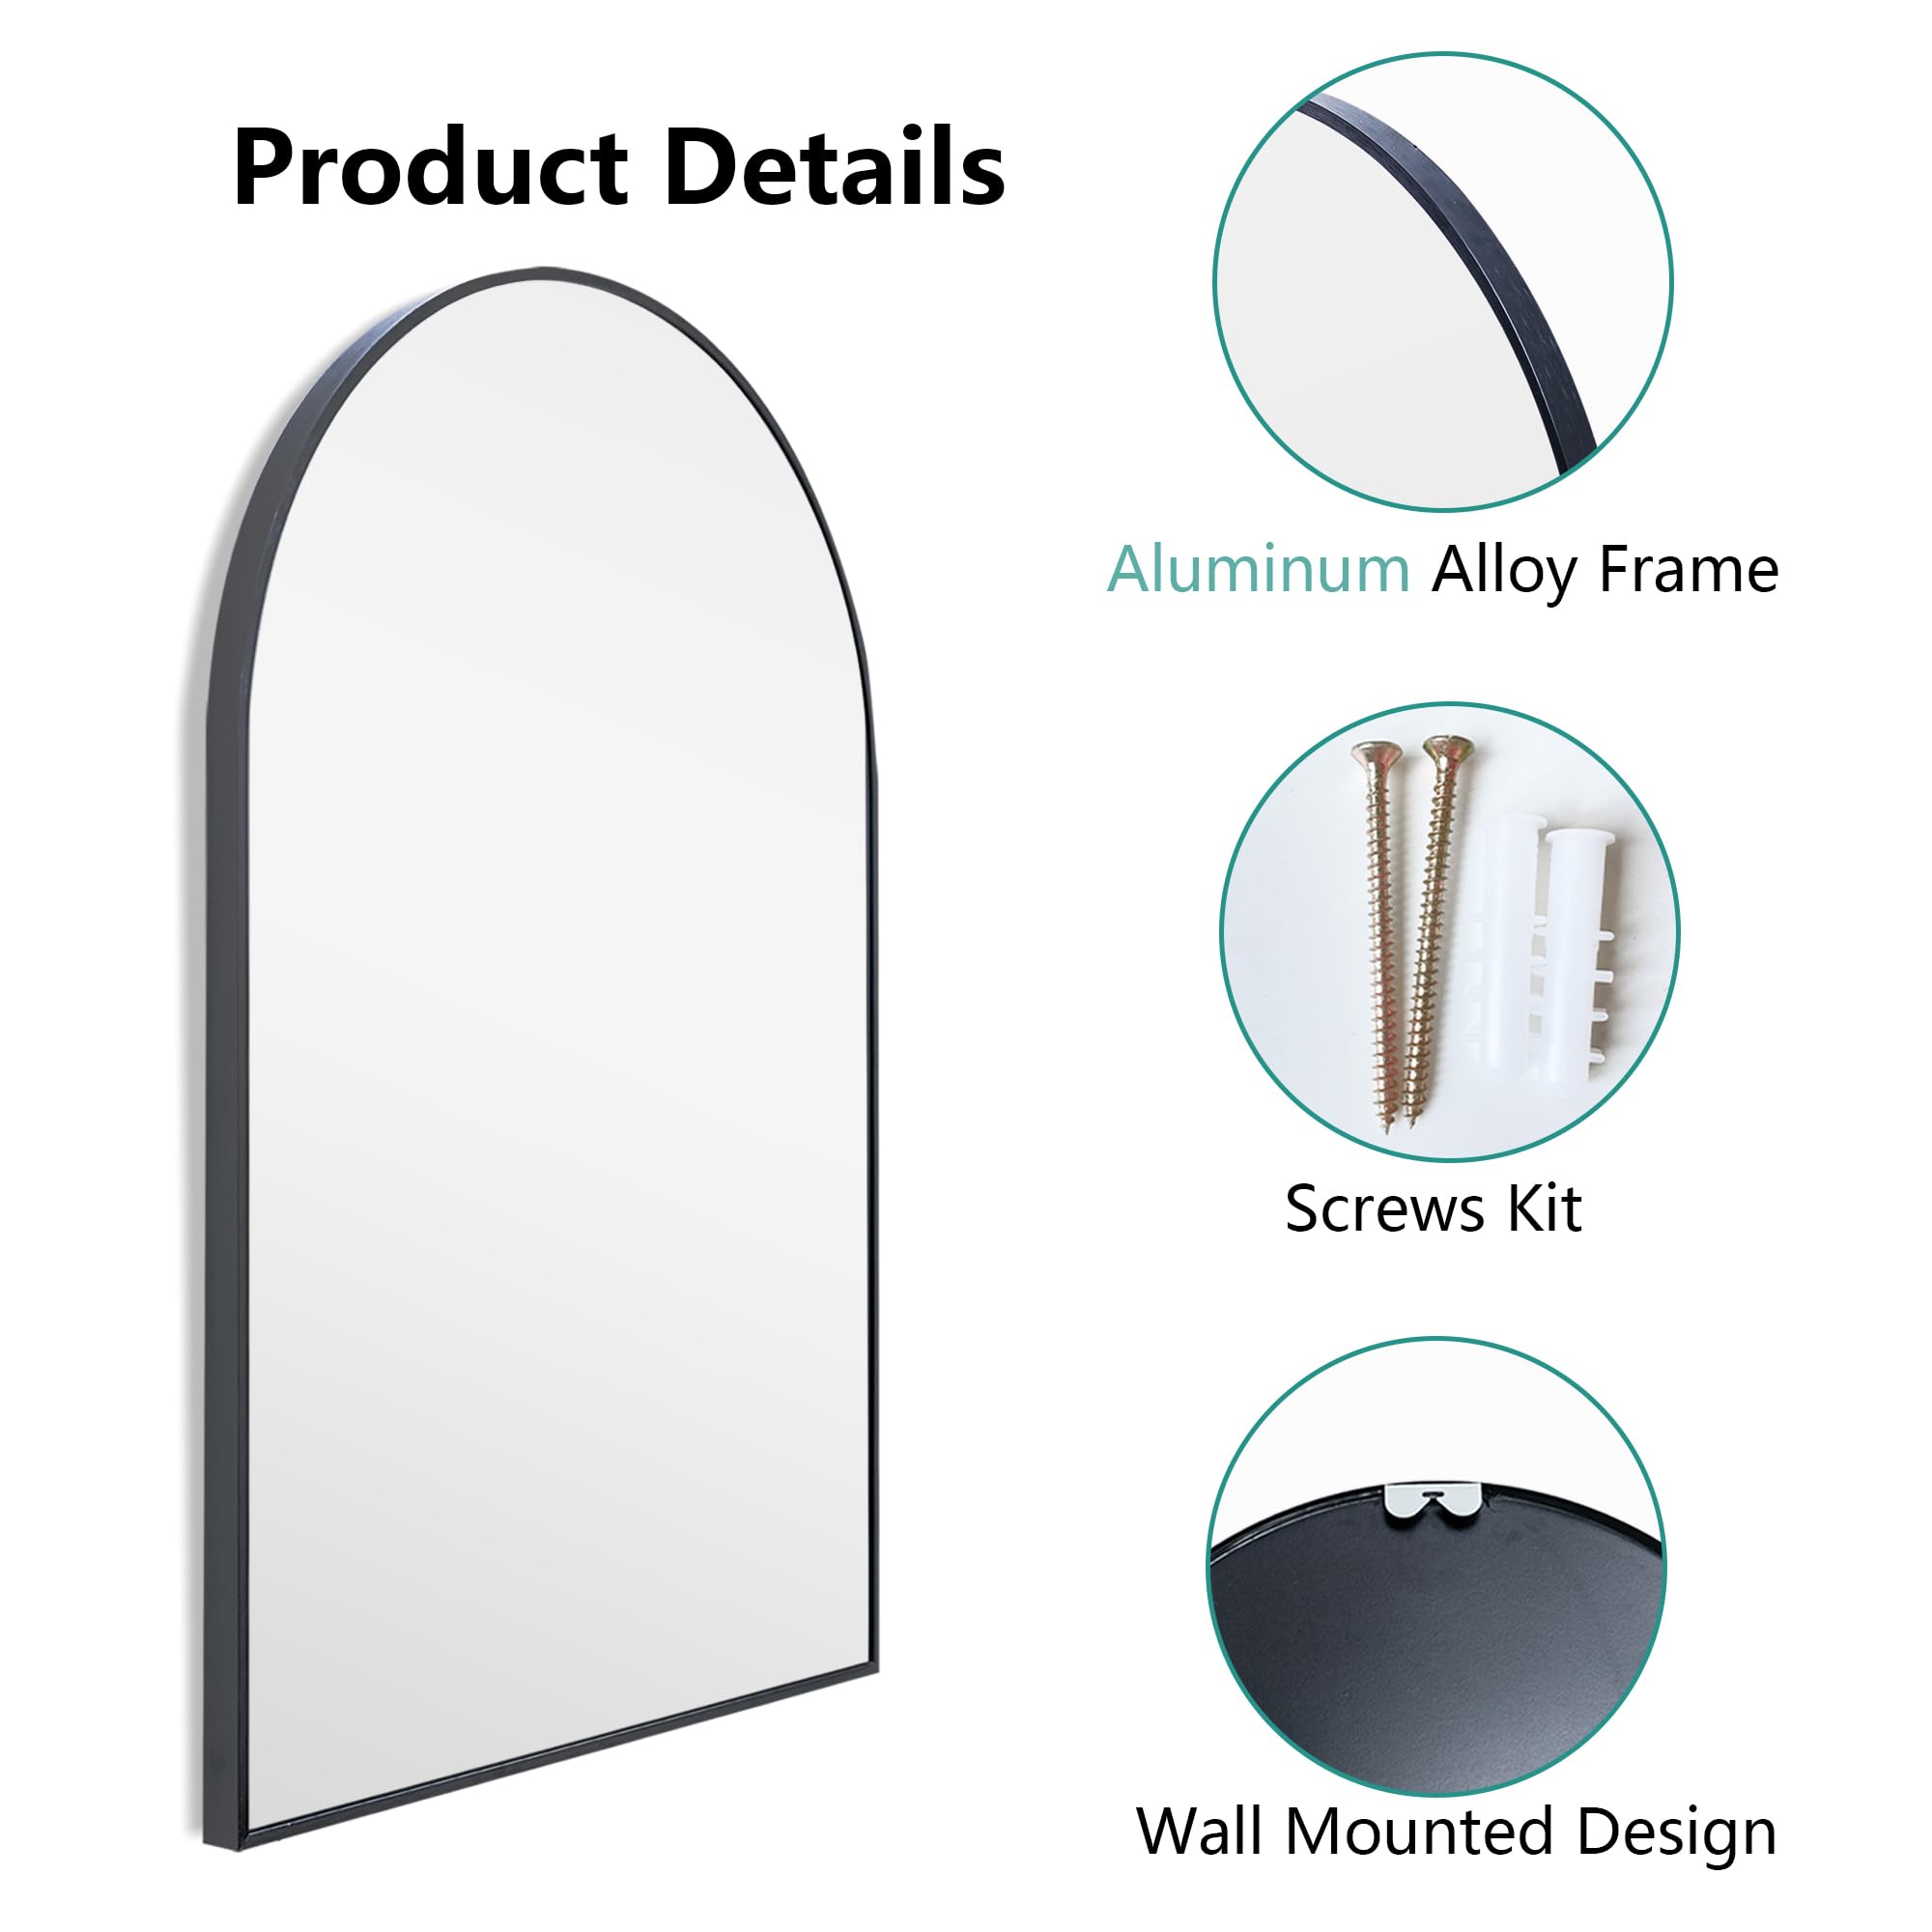 Dolonm 2 Pack 36x24 Inch Arch Wall Mirror, Bathroom Vanity Mirrors, Aluminum Alloy Frame Arch Mirrors for Wall, Wall Mounted Mirrors for Bathroom, Entryway, Black(Set of 2)